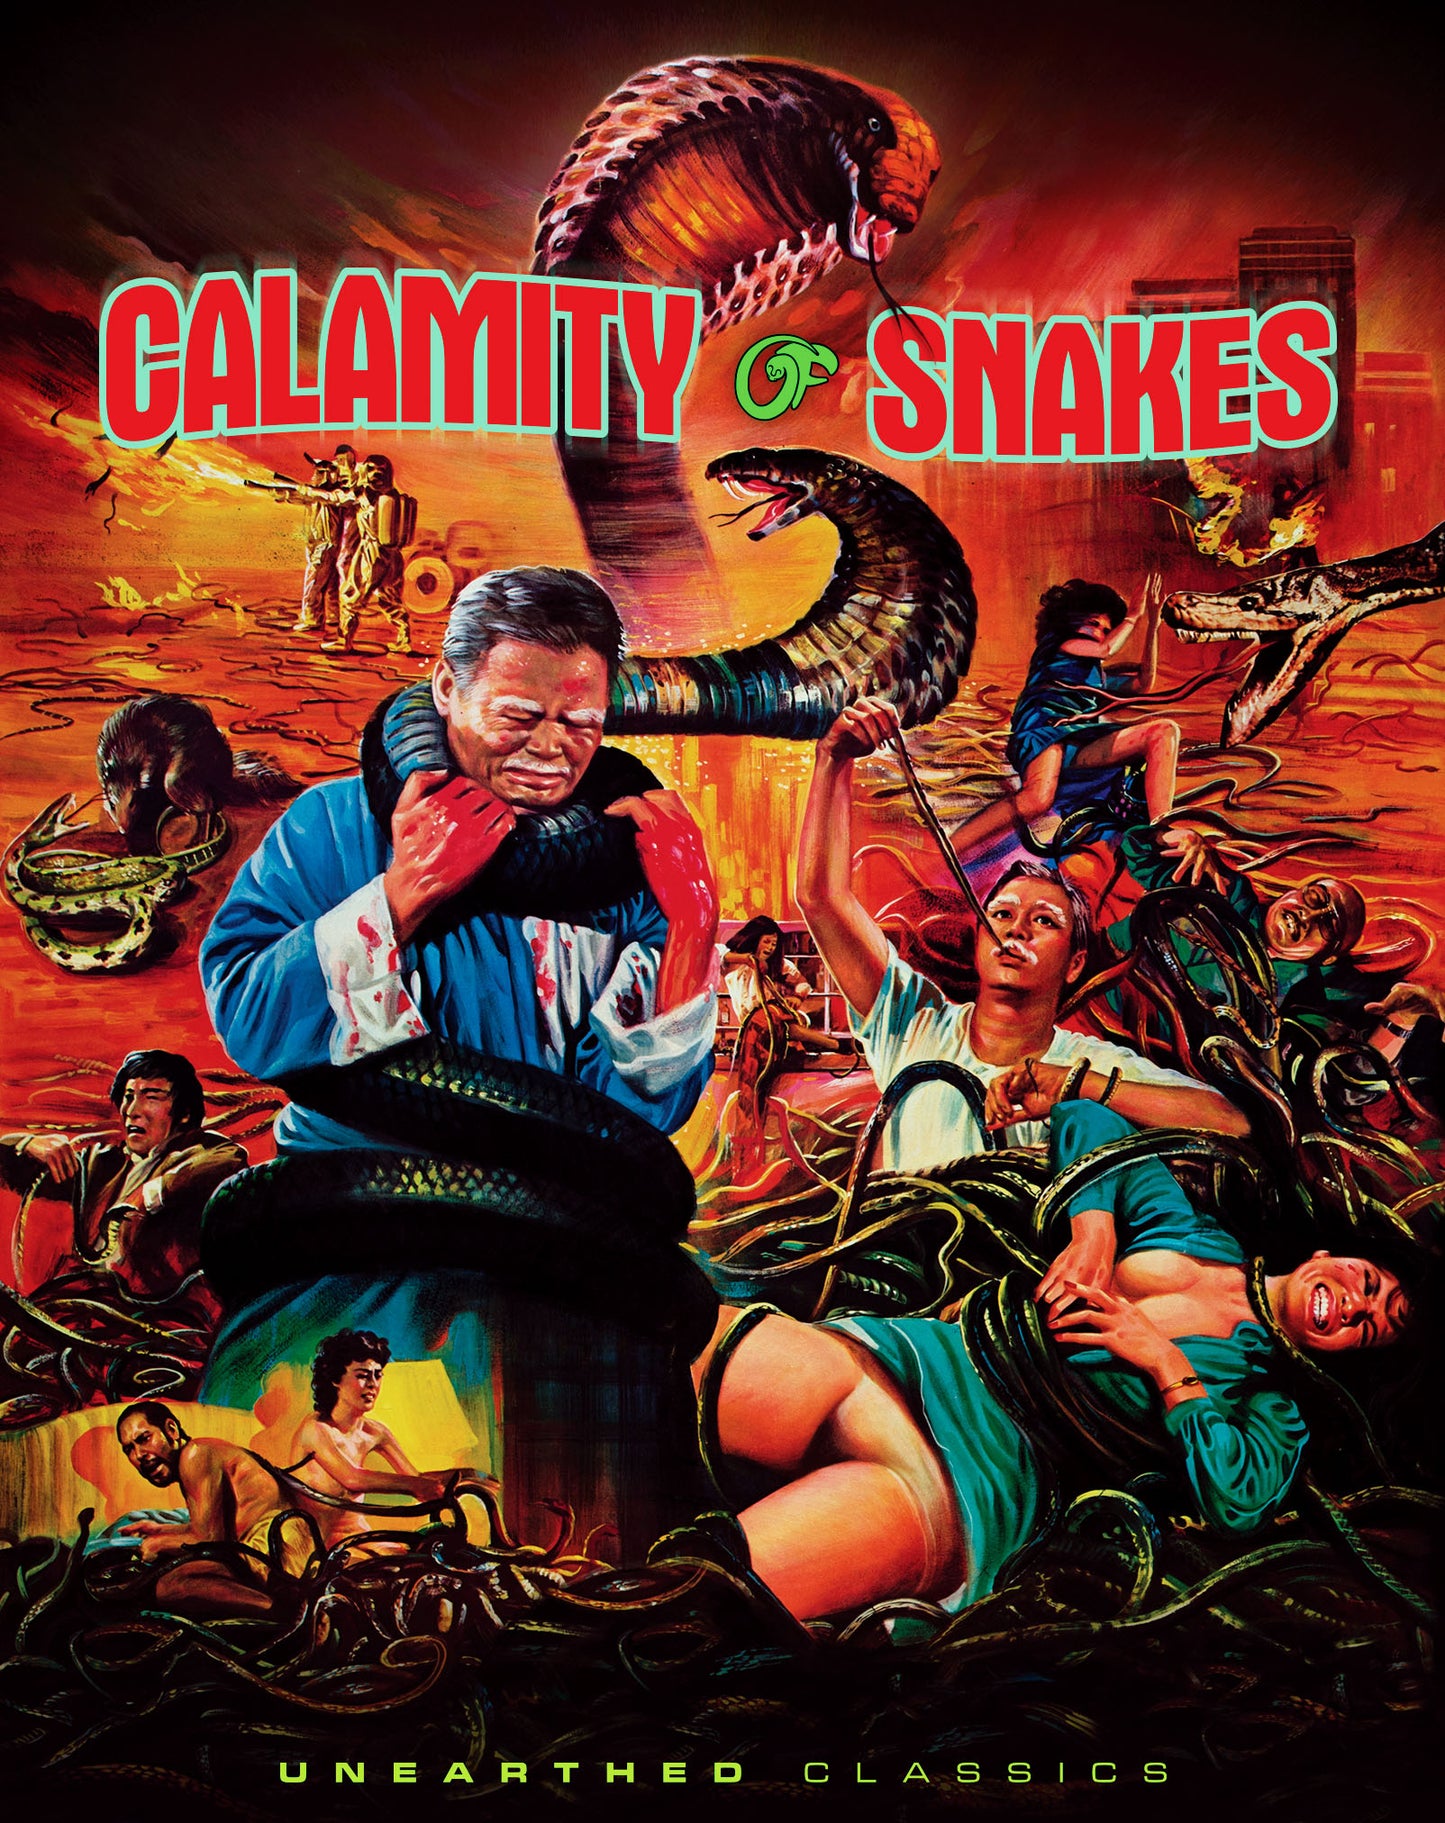 Calamity of Snakes Unearthed Films Blu-Ray [NEW] [SLIPCOVER]